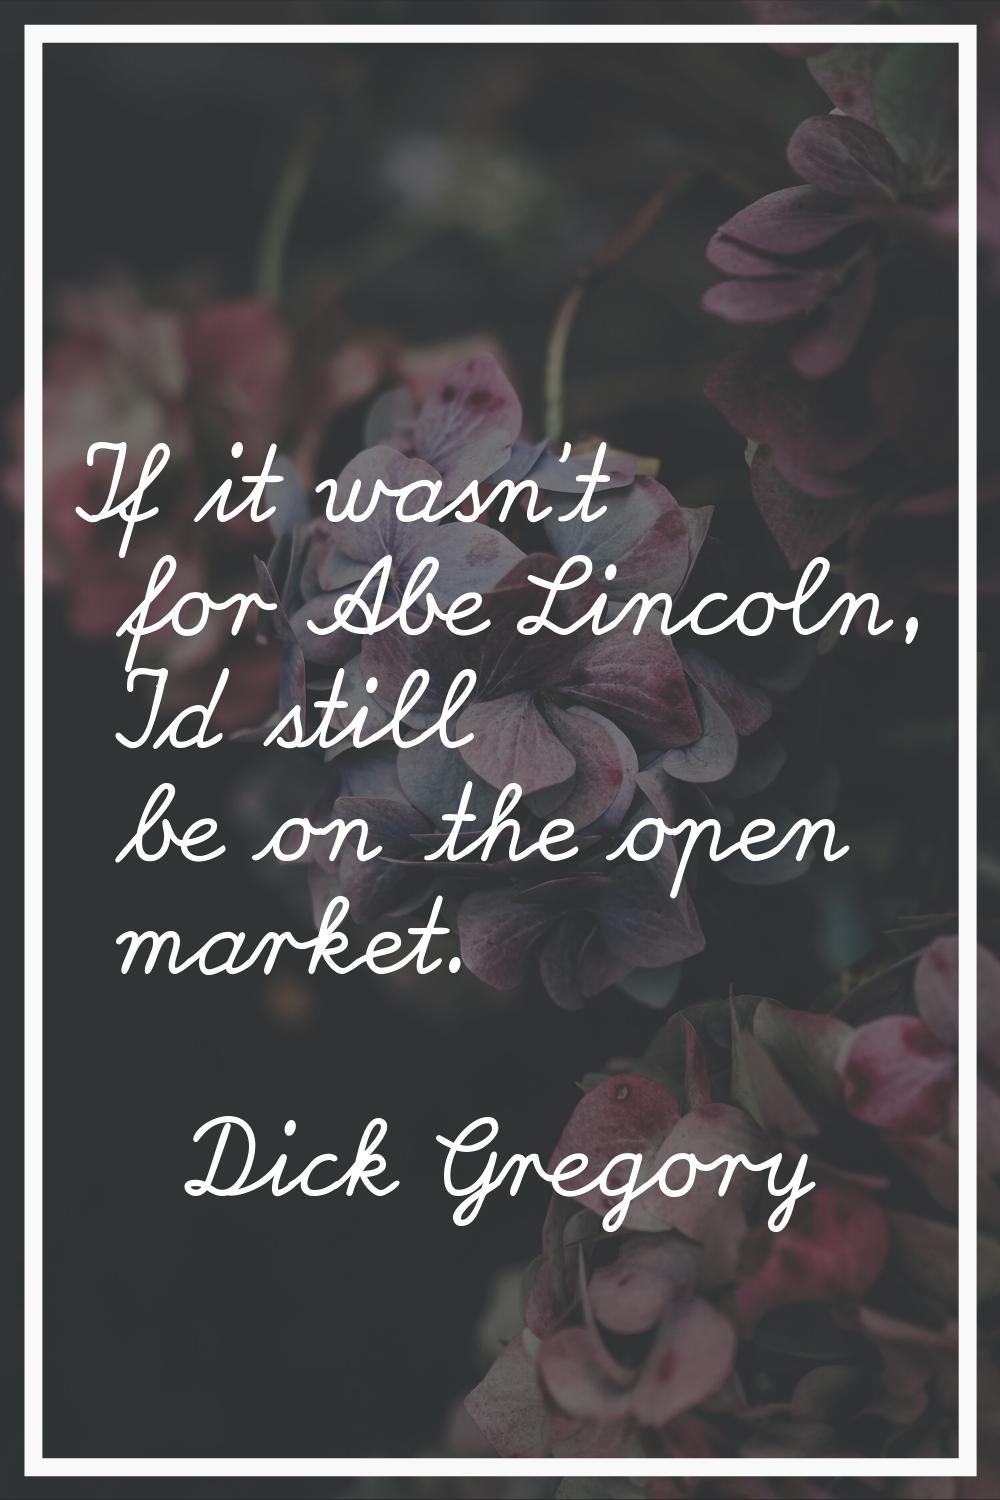 If it wasn't for Abe Lincoln, I'd still be on the open market.